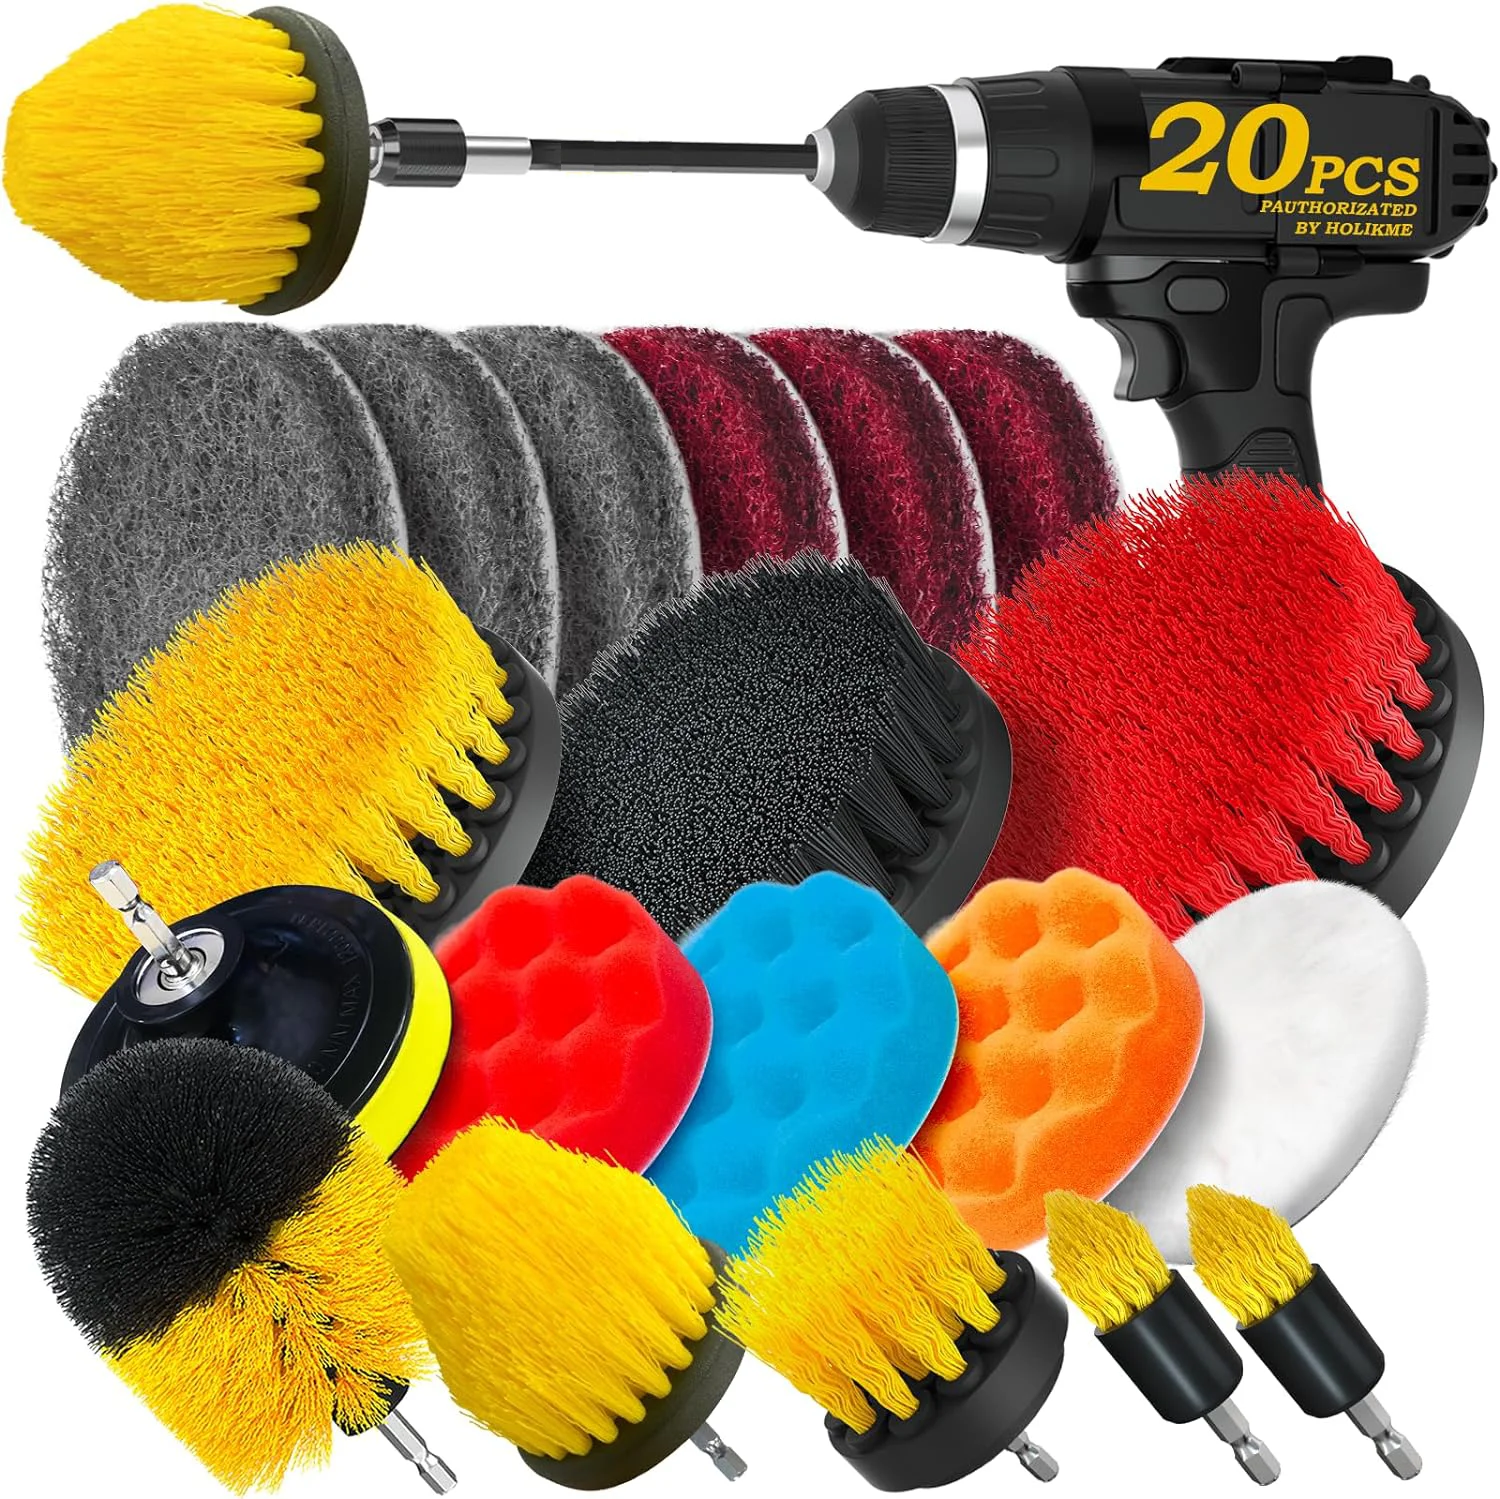 

21 Pcs Drill Cleaning Brush Attachments Set with Scrub Pads Sponge Buffing Pads Extend Long Attachment for Cleaning Bathroom